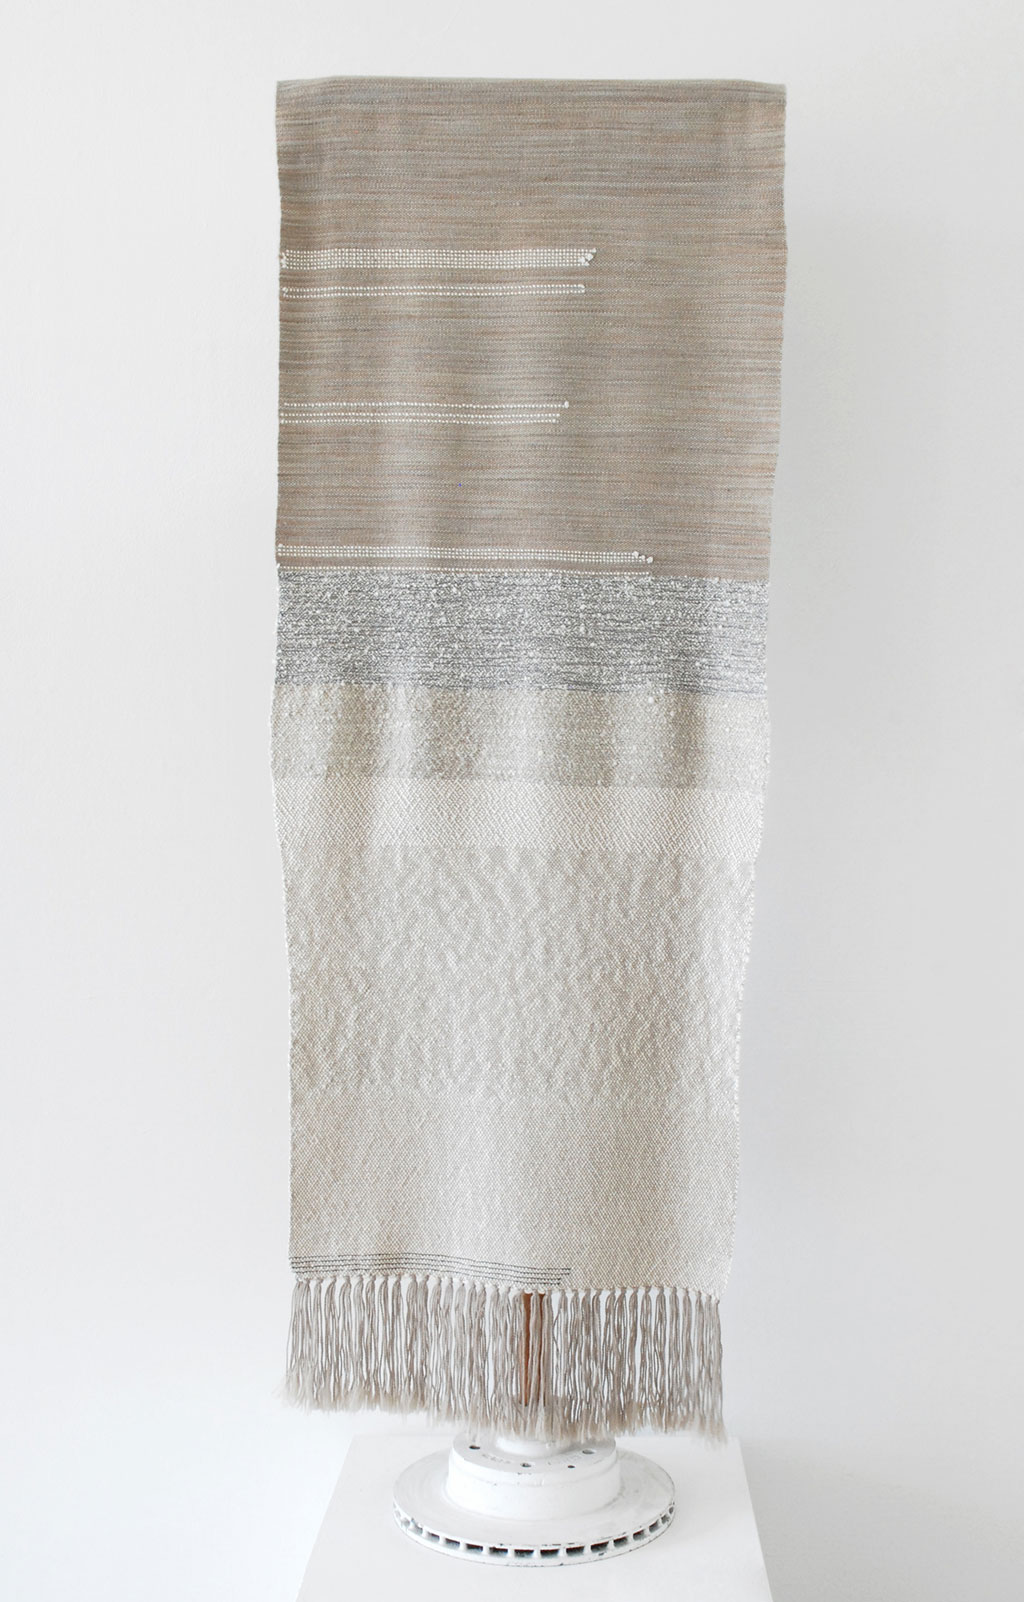 Rachel Snack, Untitled, hand woven textile for the body, 2019, Material Meaning: A Living Legacy of Anni Albers, Craft in America